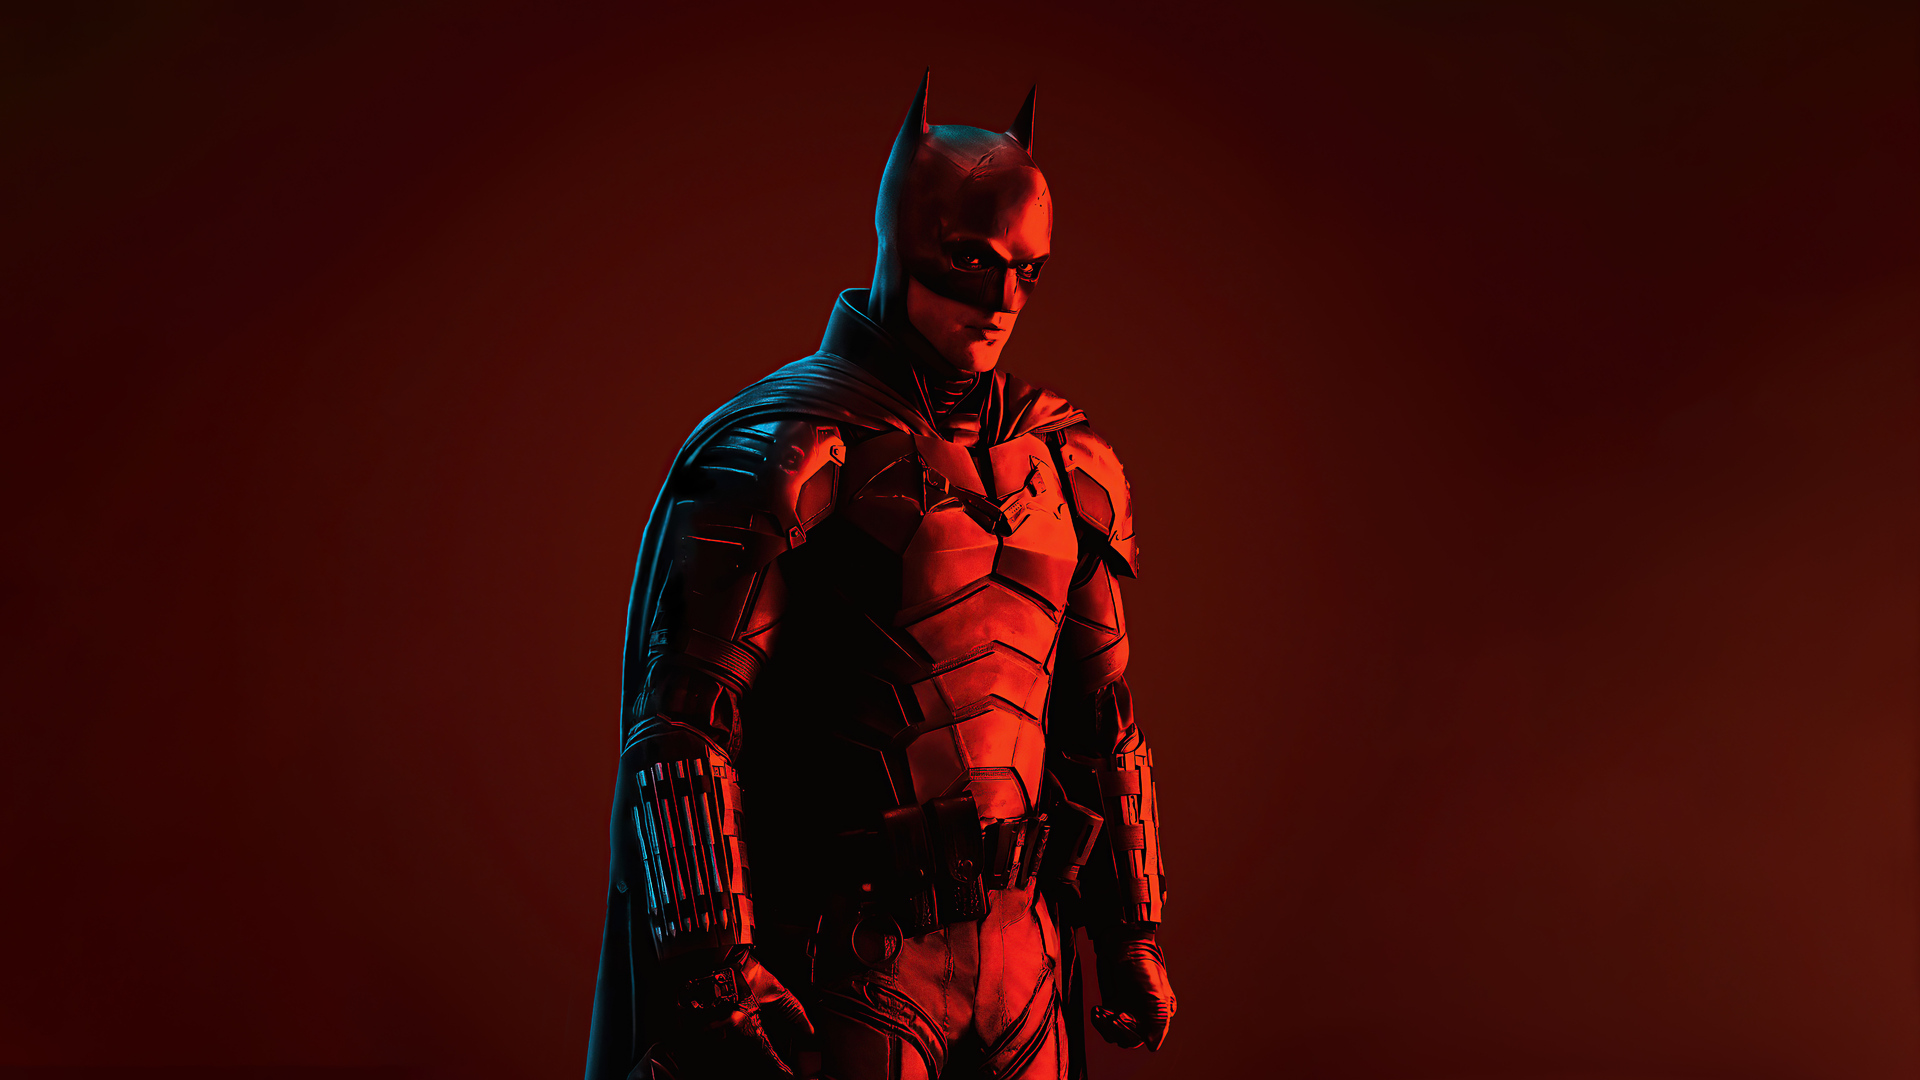 Batman Wallpaper for mobile phone, tablet, desktop computer and other  devices HD and 4K wallpapers.